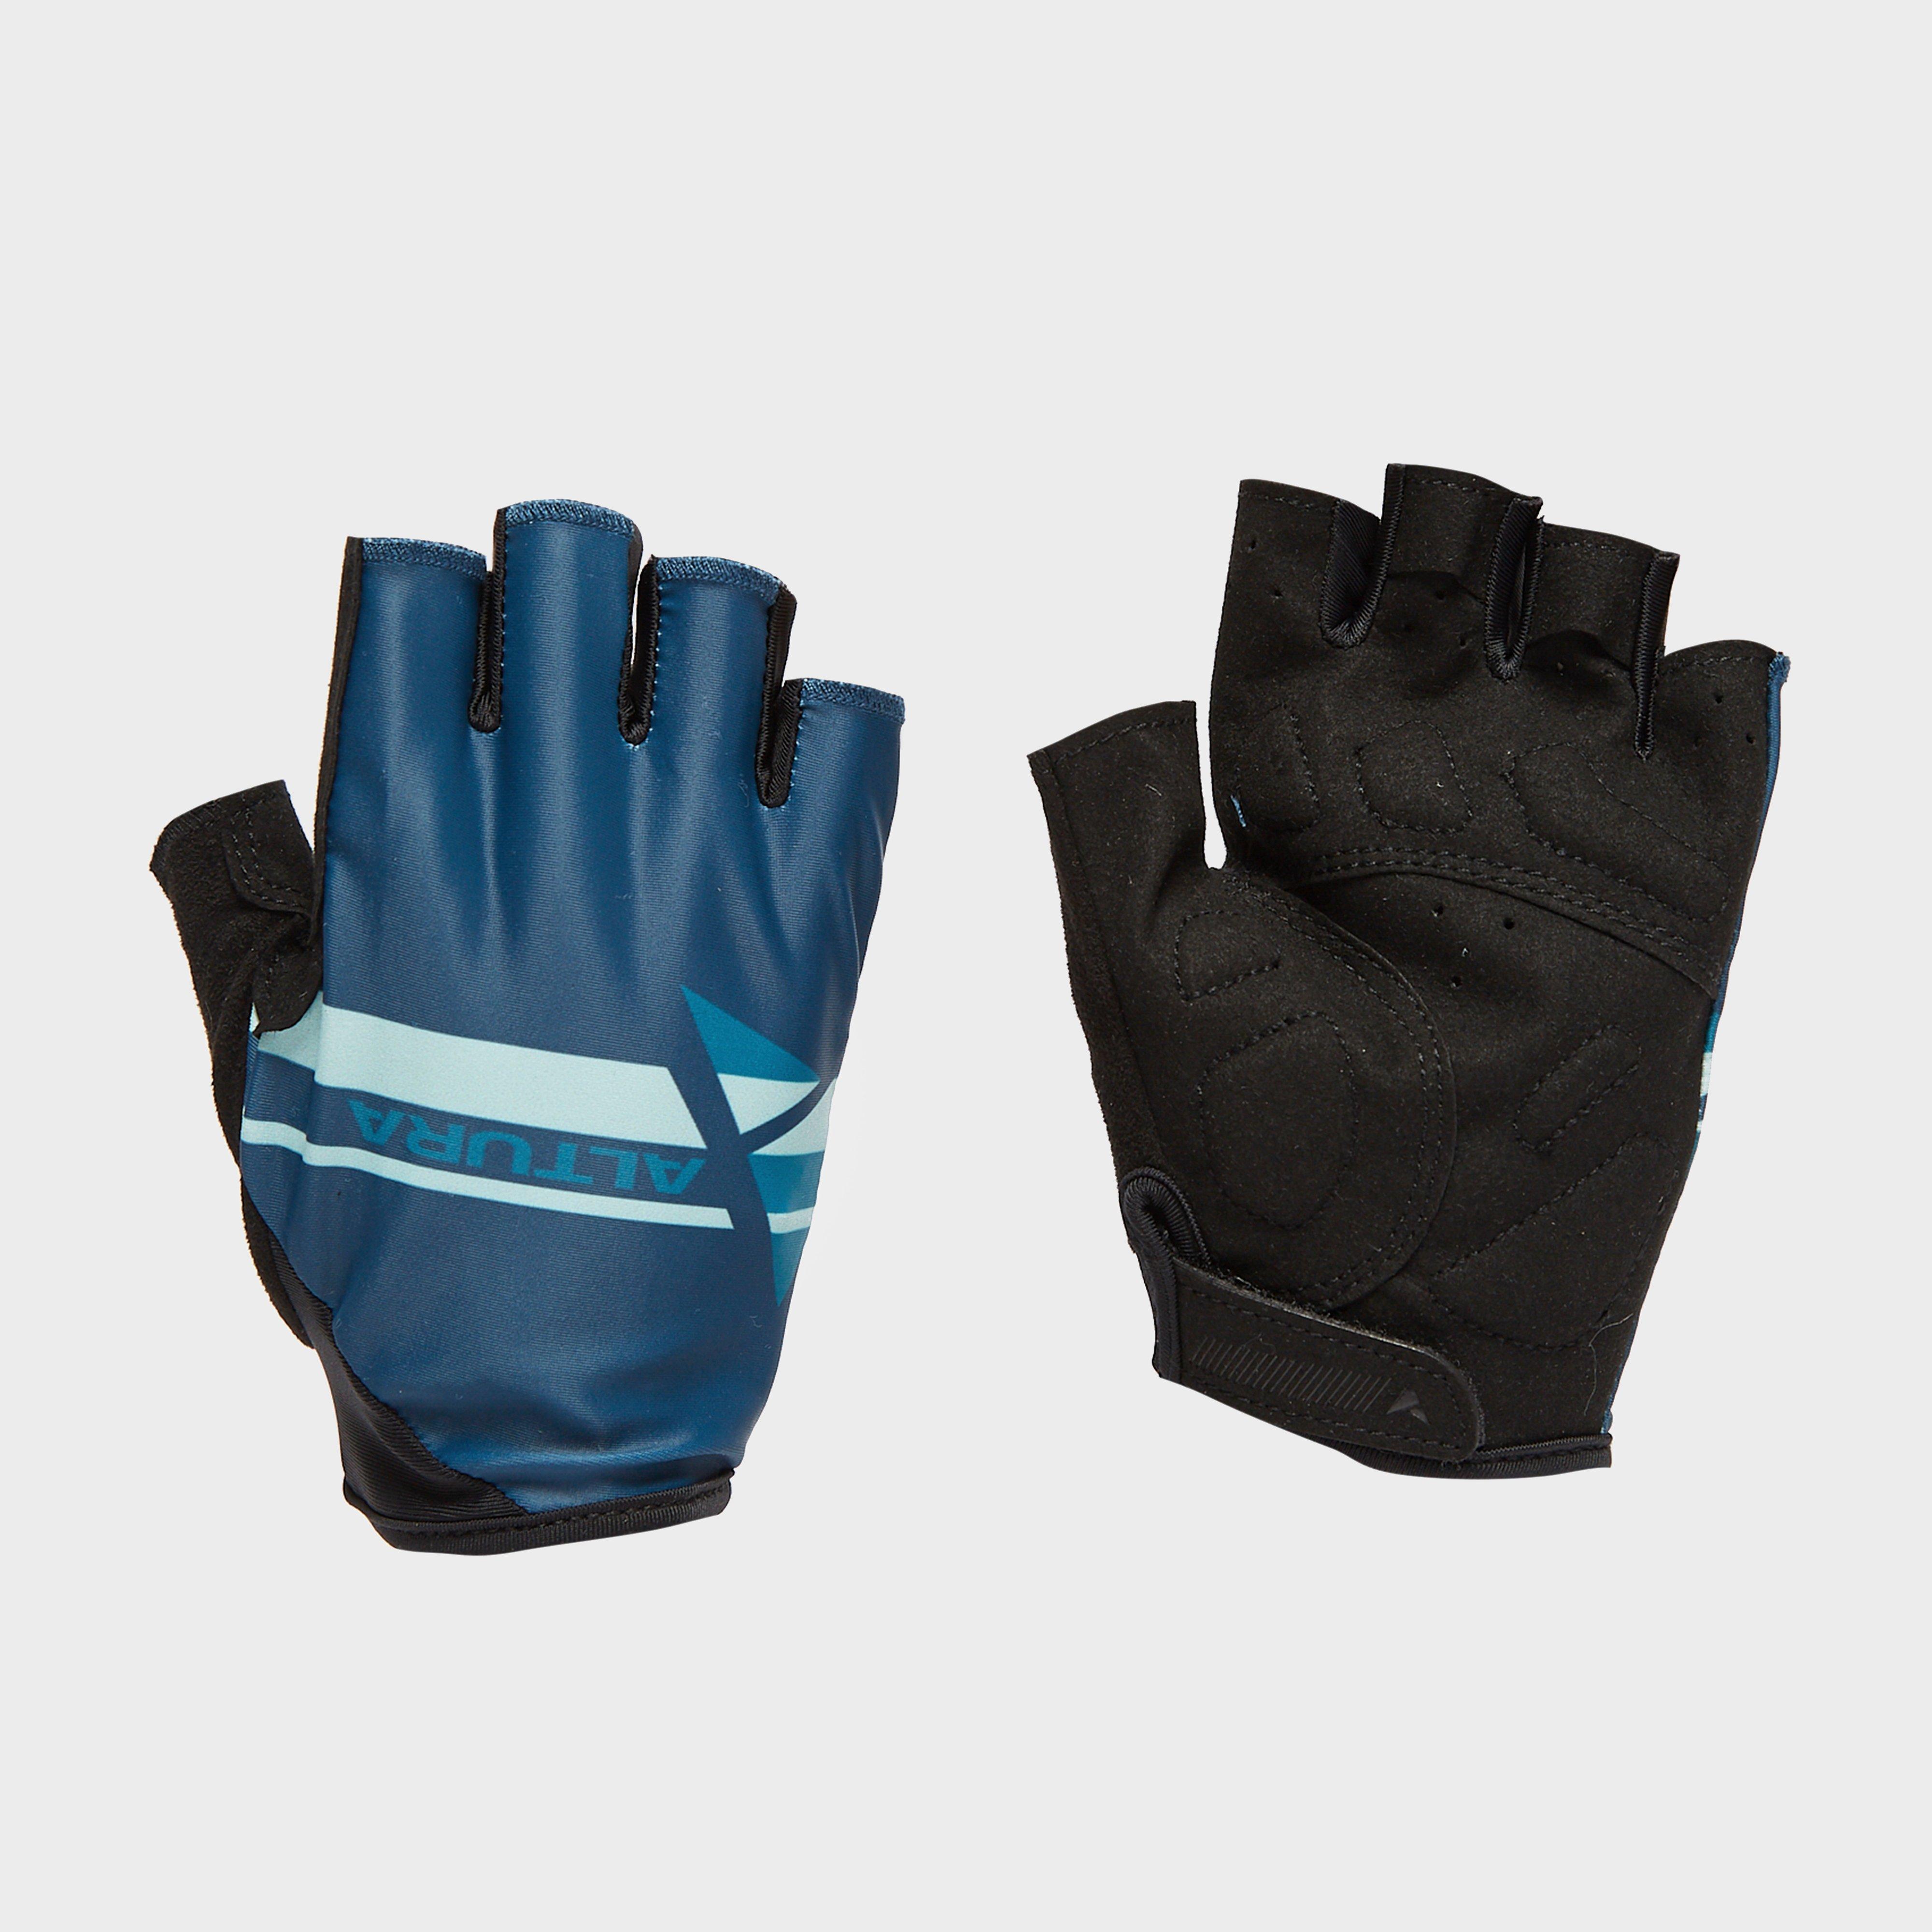 Altura Airstream Cycling Mitts - Blue/blue  Blue/blue